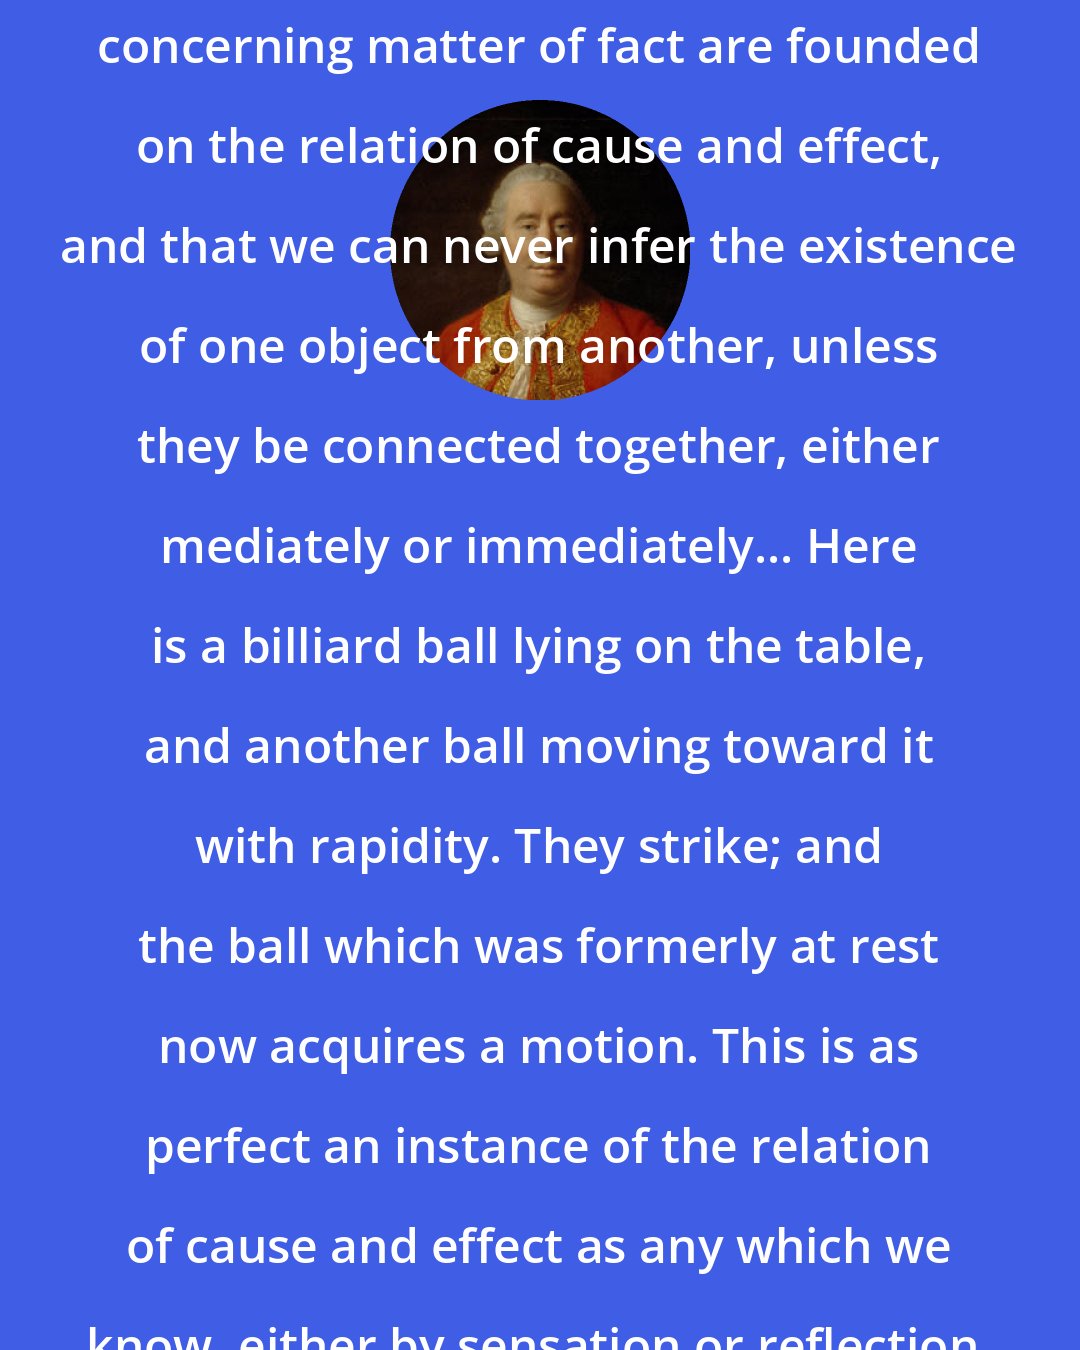 David Hume: Tis evident that all reasonings concerning matter of fact are founded on the relation of cause and effect, and that we can never infer the existence of one object from another, unless they be connected together, either mediately or immediately... Here is a billiard ball lying on the table, and another ball moving toward it with rapidity. They strike; and the ball which was formerly at rest now acquires a motion. This is as perfect an instance of the relation of cause and effect as any which we know, either by sensation or reflection.